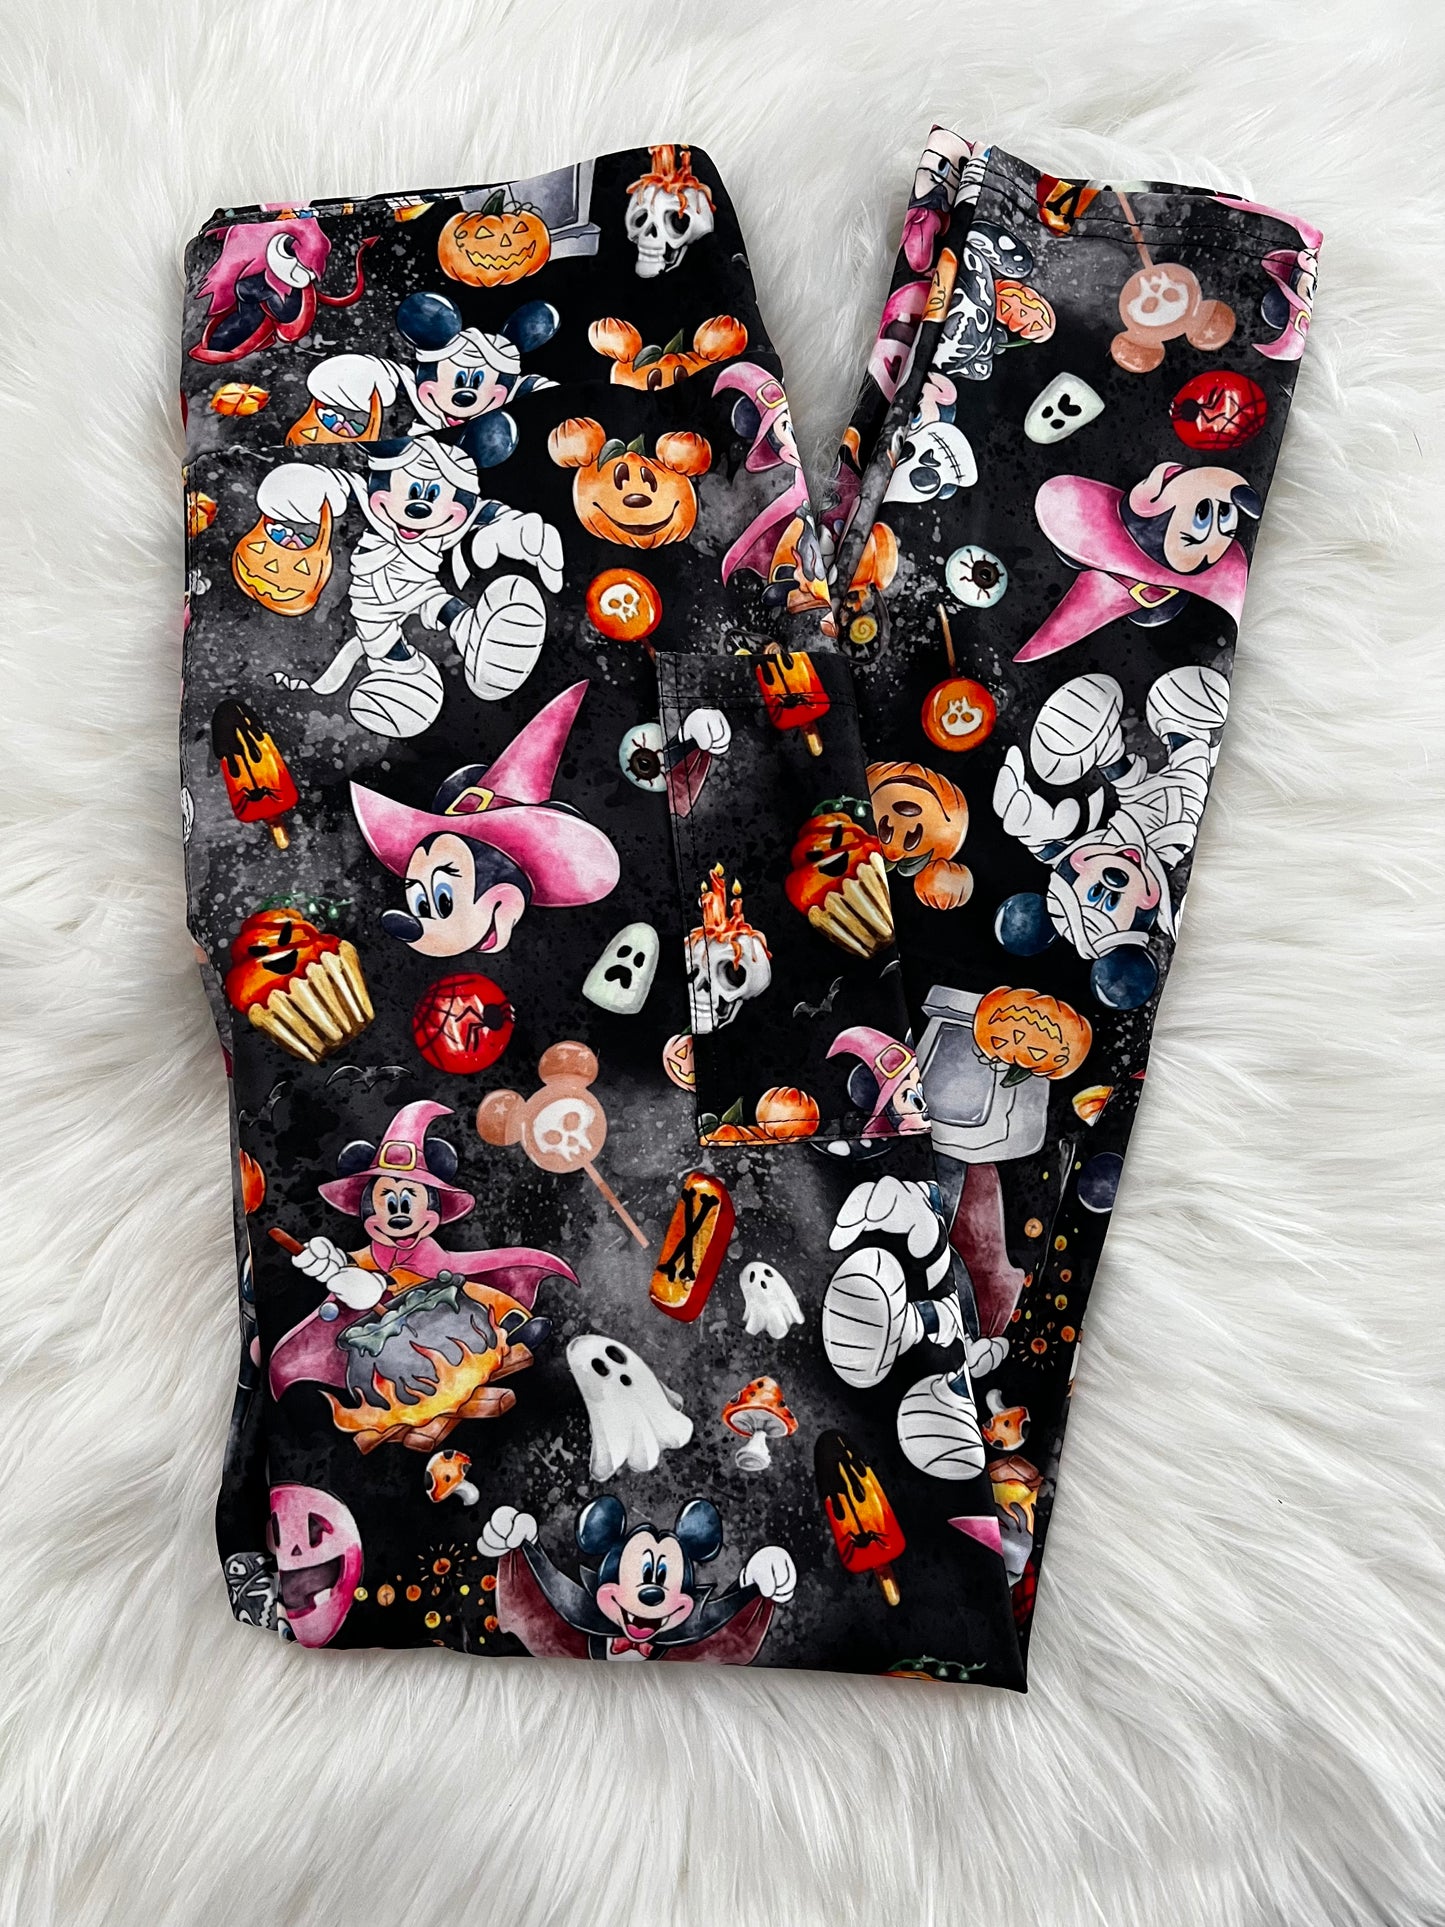 Costume Mouse Legging full with pockets